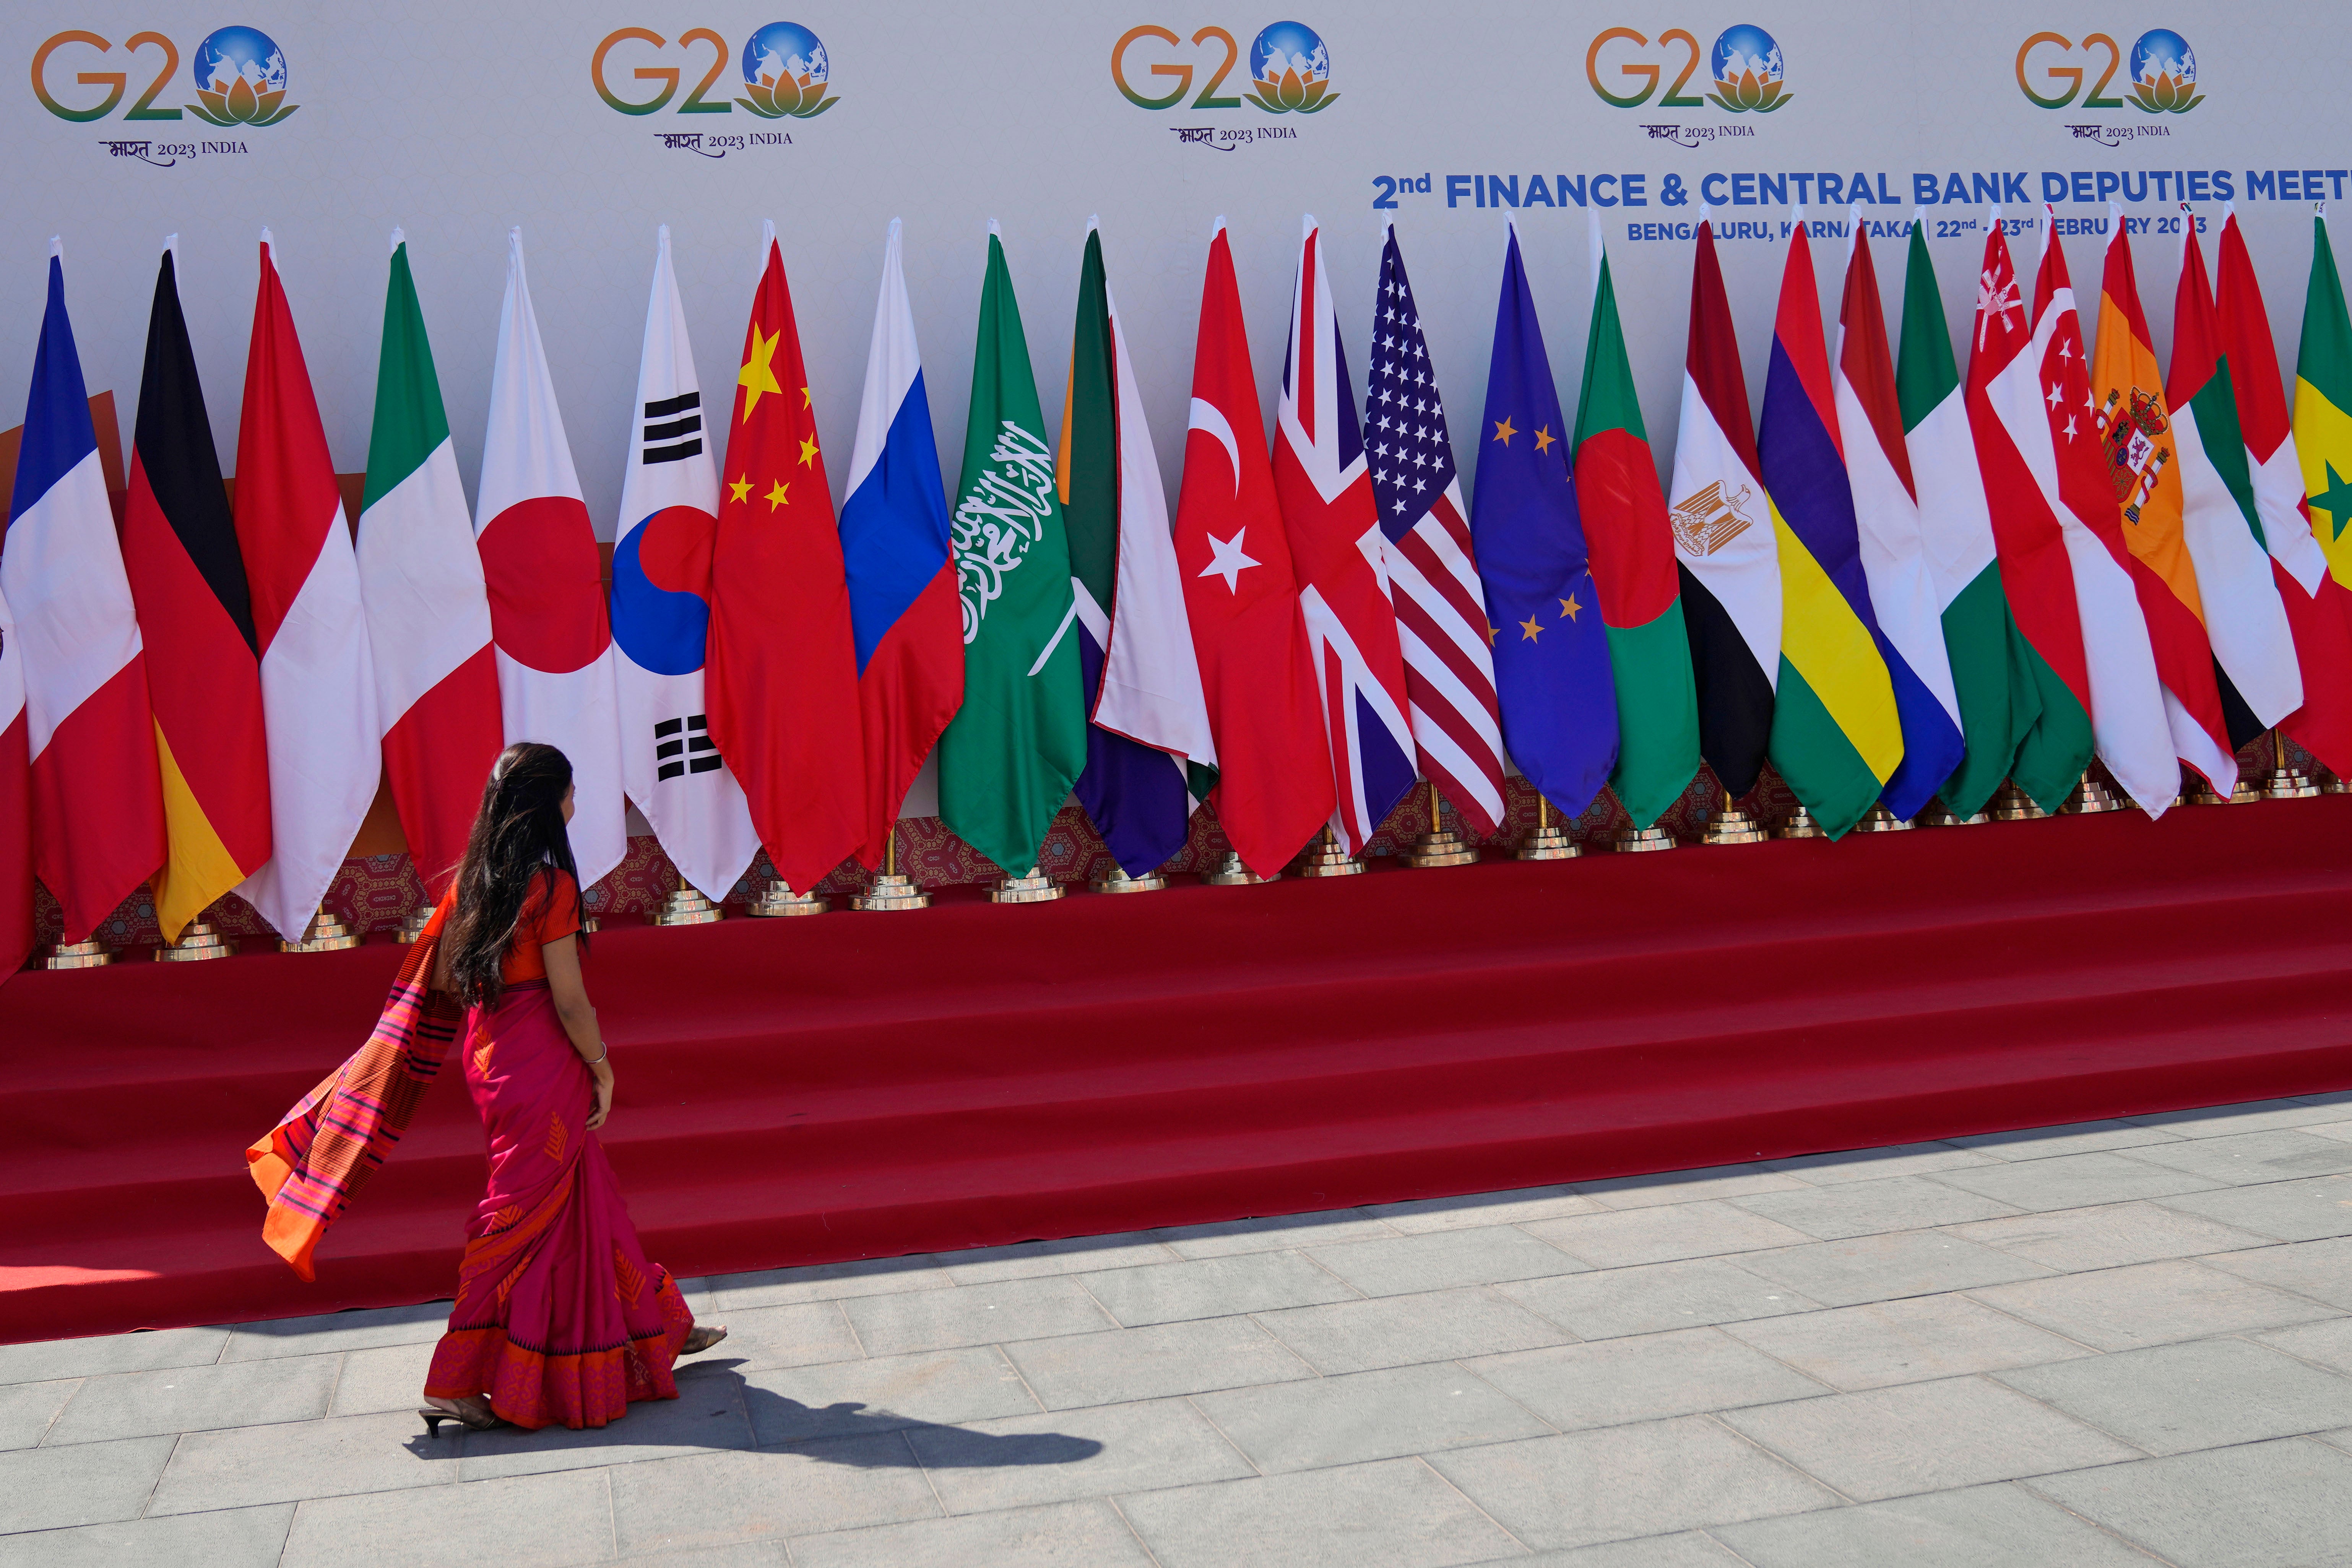 A delegate walks past a display of flags of participating countries at the venue of G-20